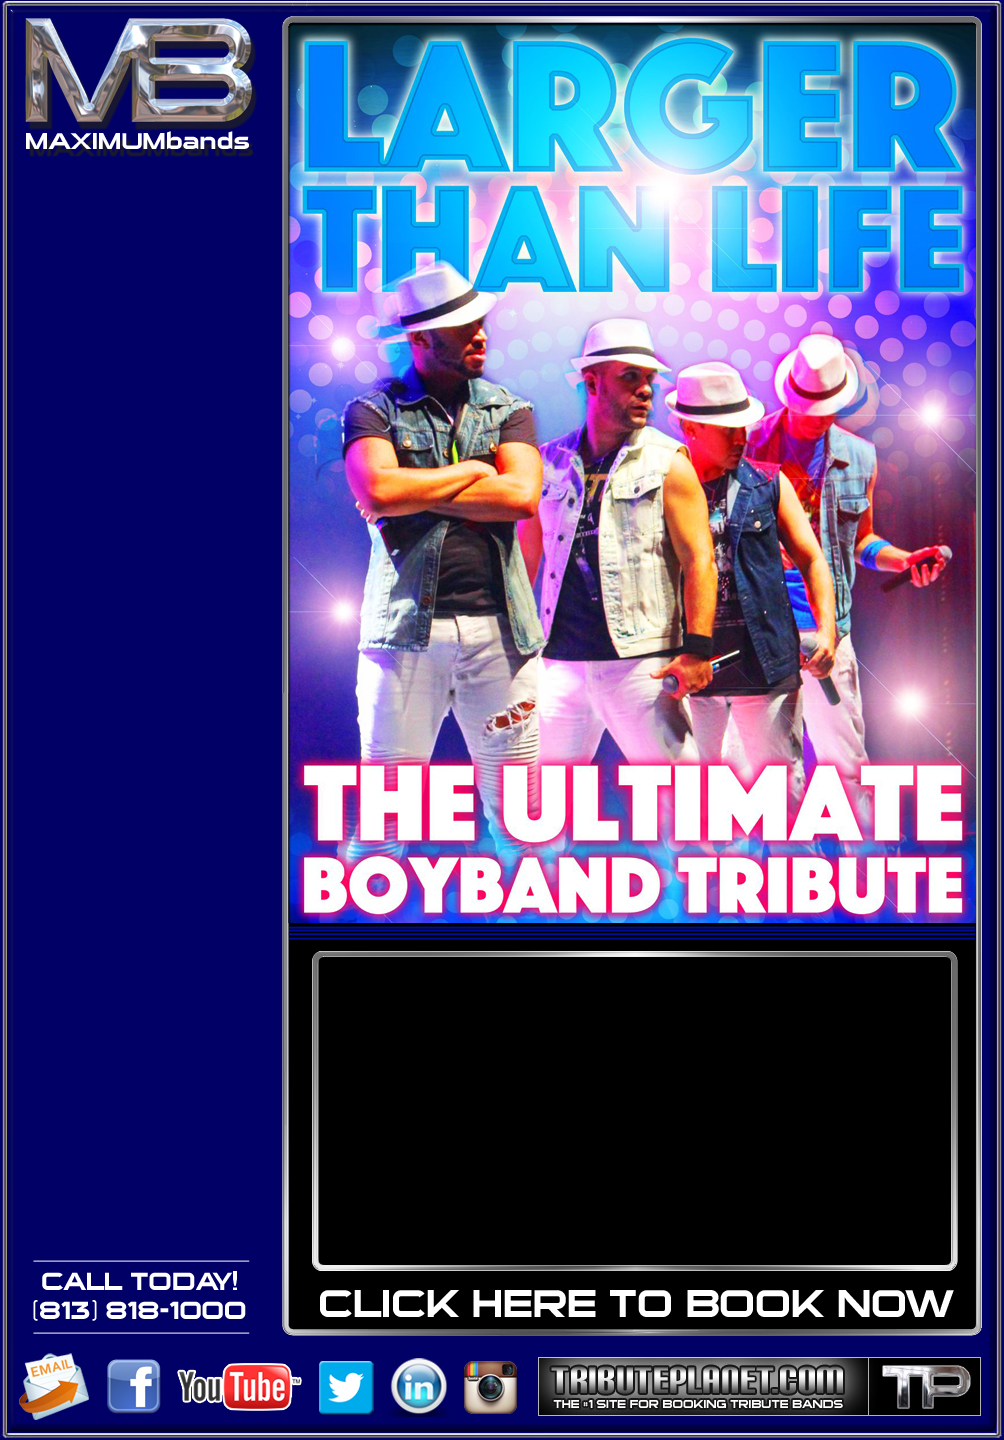 tribute bands